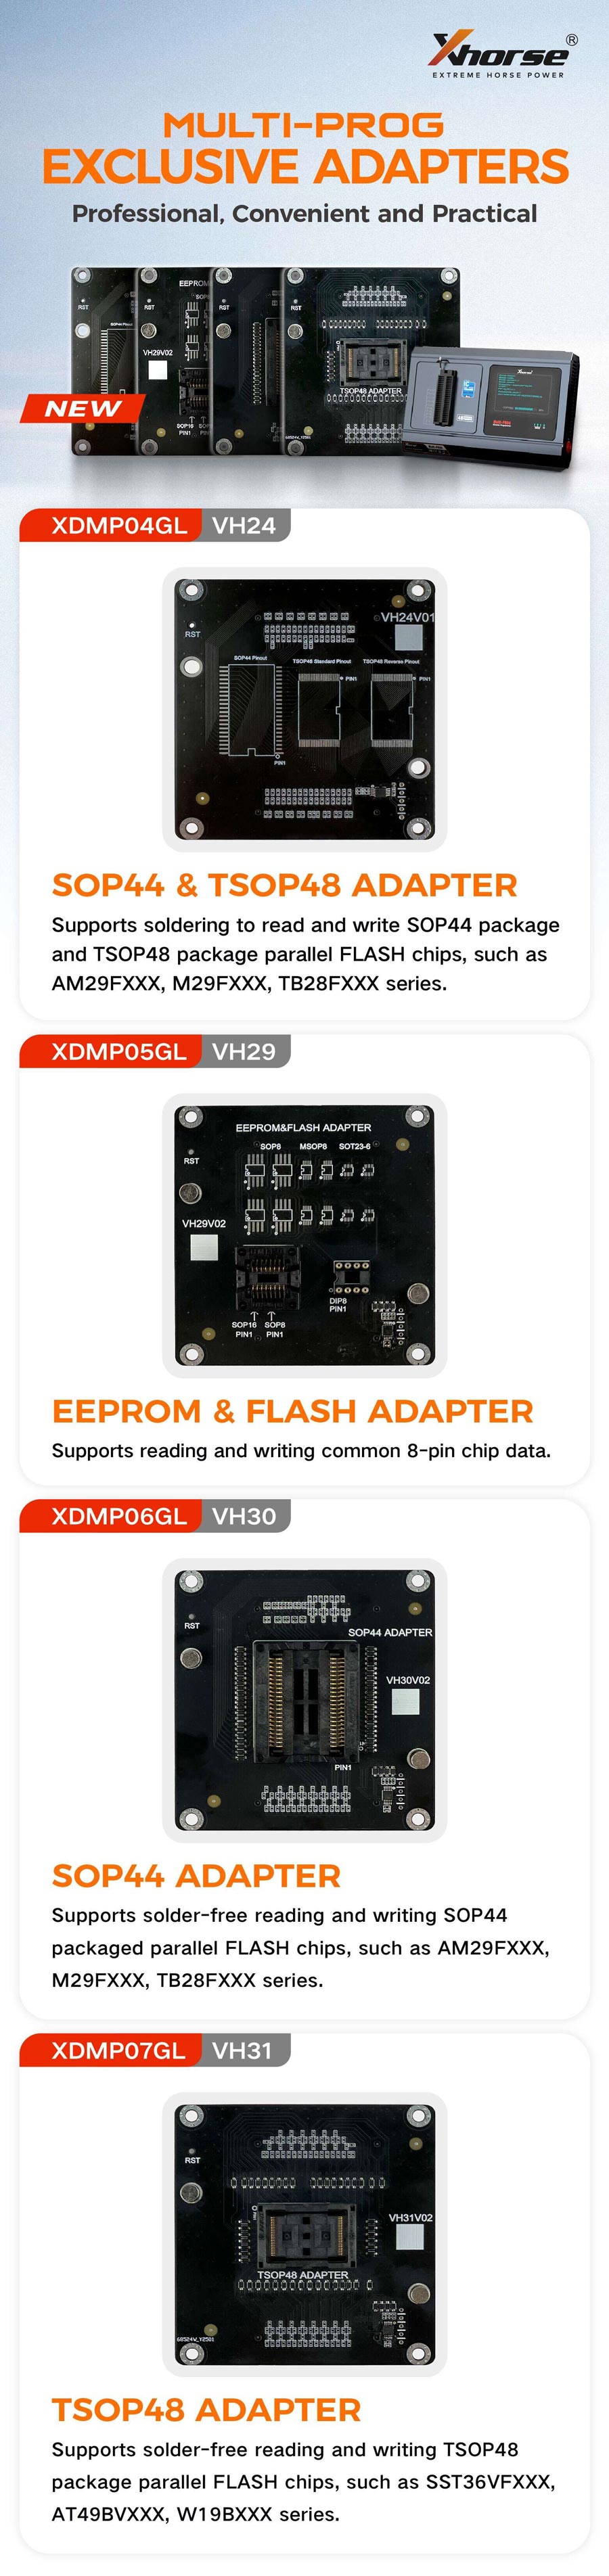 XHORSE XDMPO6GL VH30 SOP44 Adapter